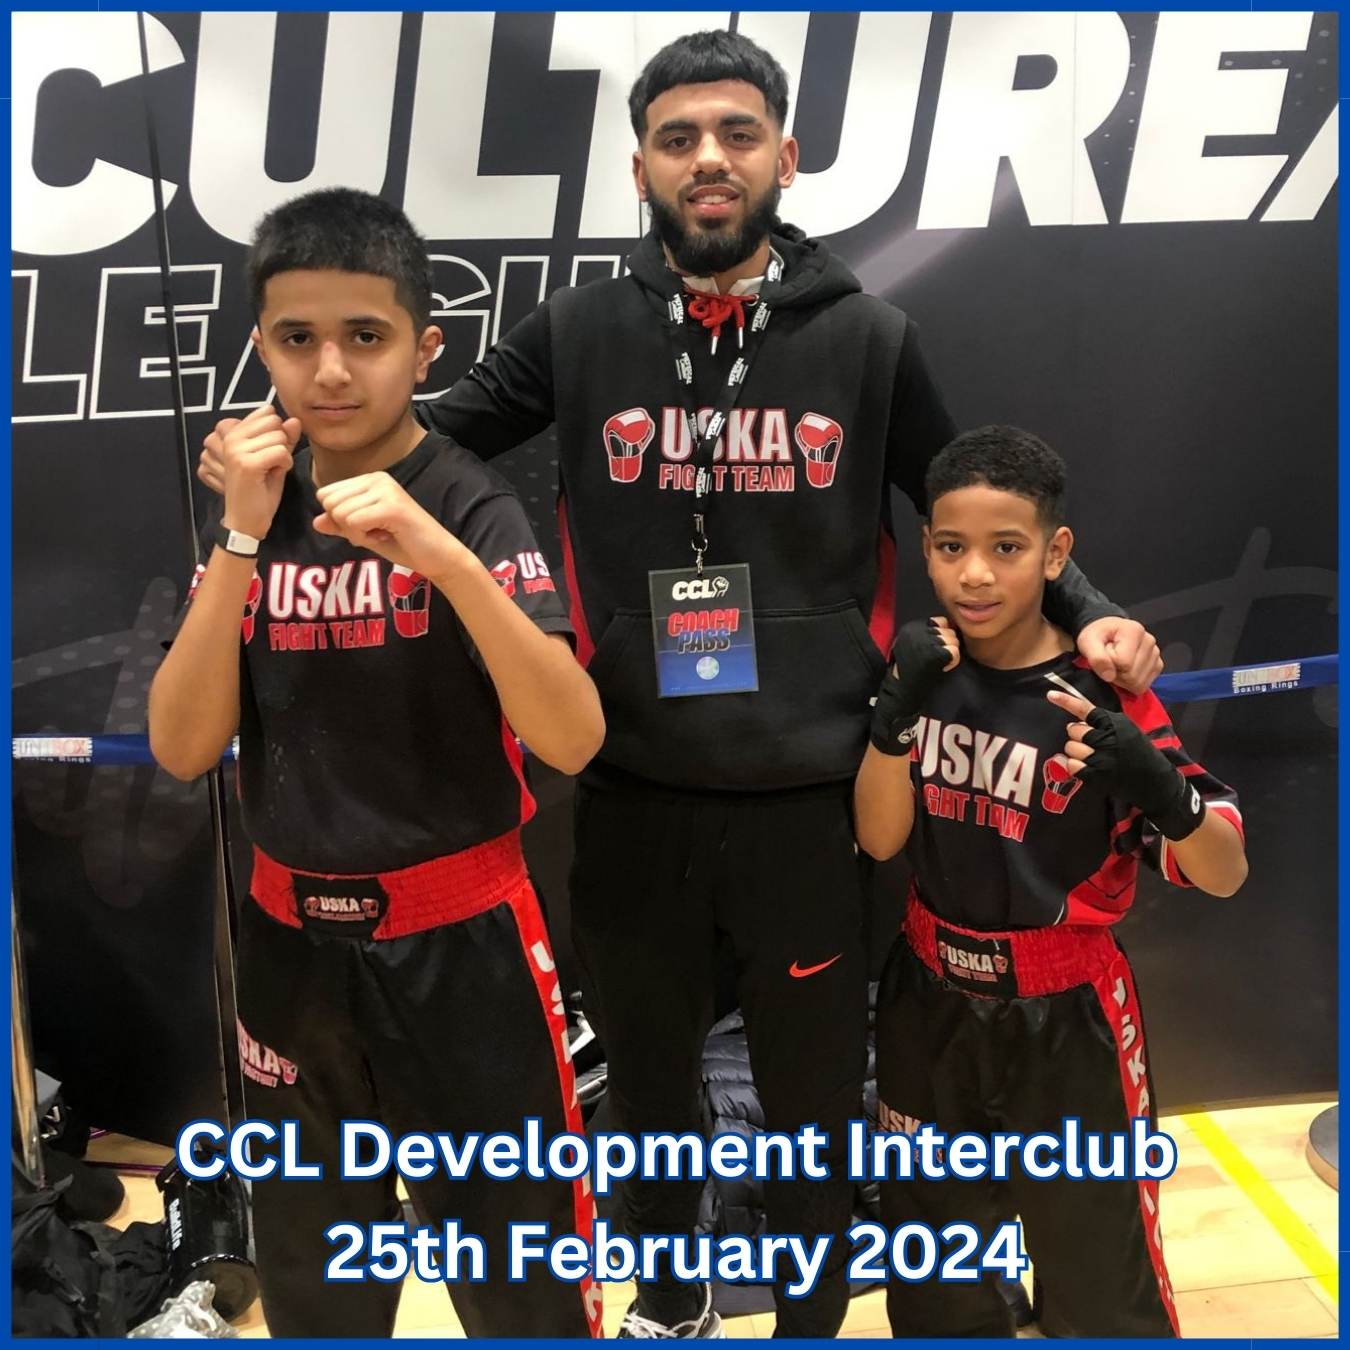 25-02-24 - Team of Two out at CCL Development Interclub!